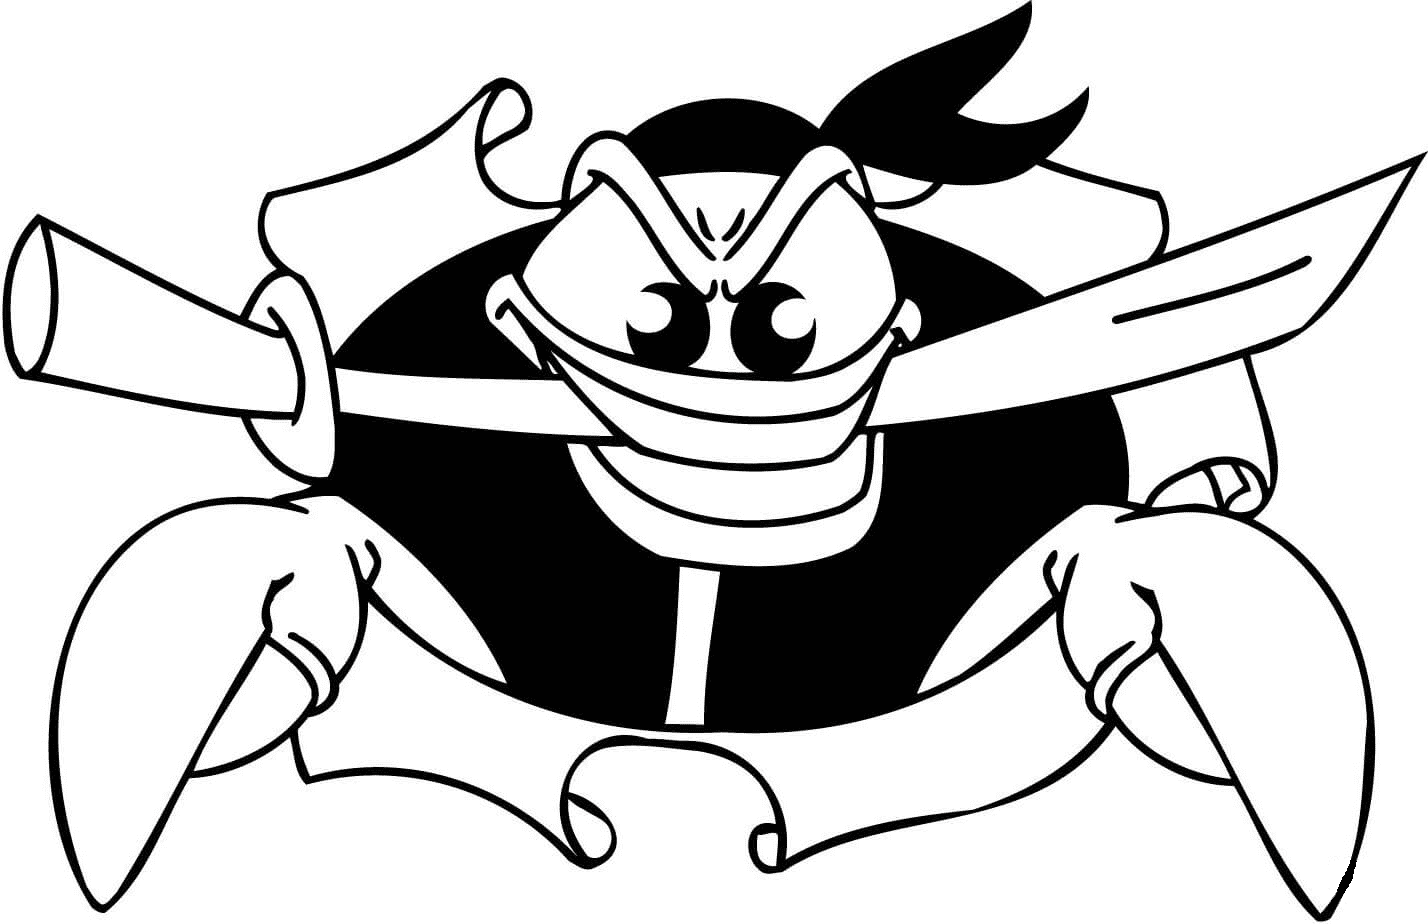 Pirate Crab With A Sword In The Mouth Coloring Pages